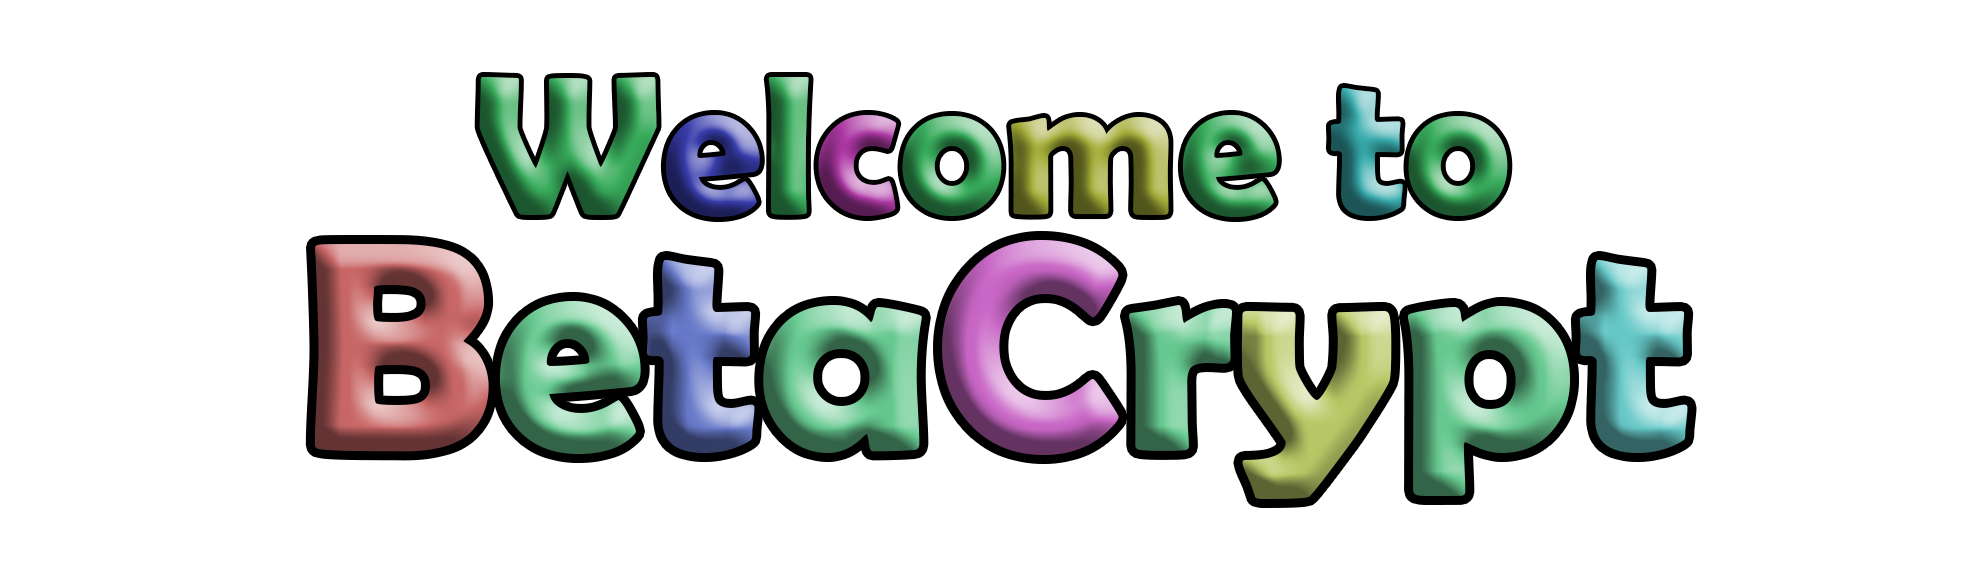 Welcome to BetaCrypt